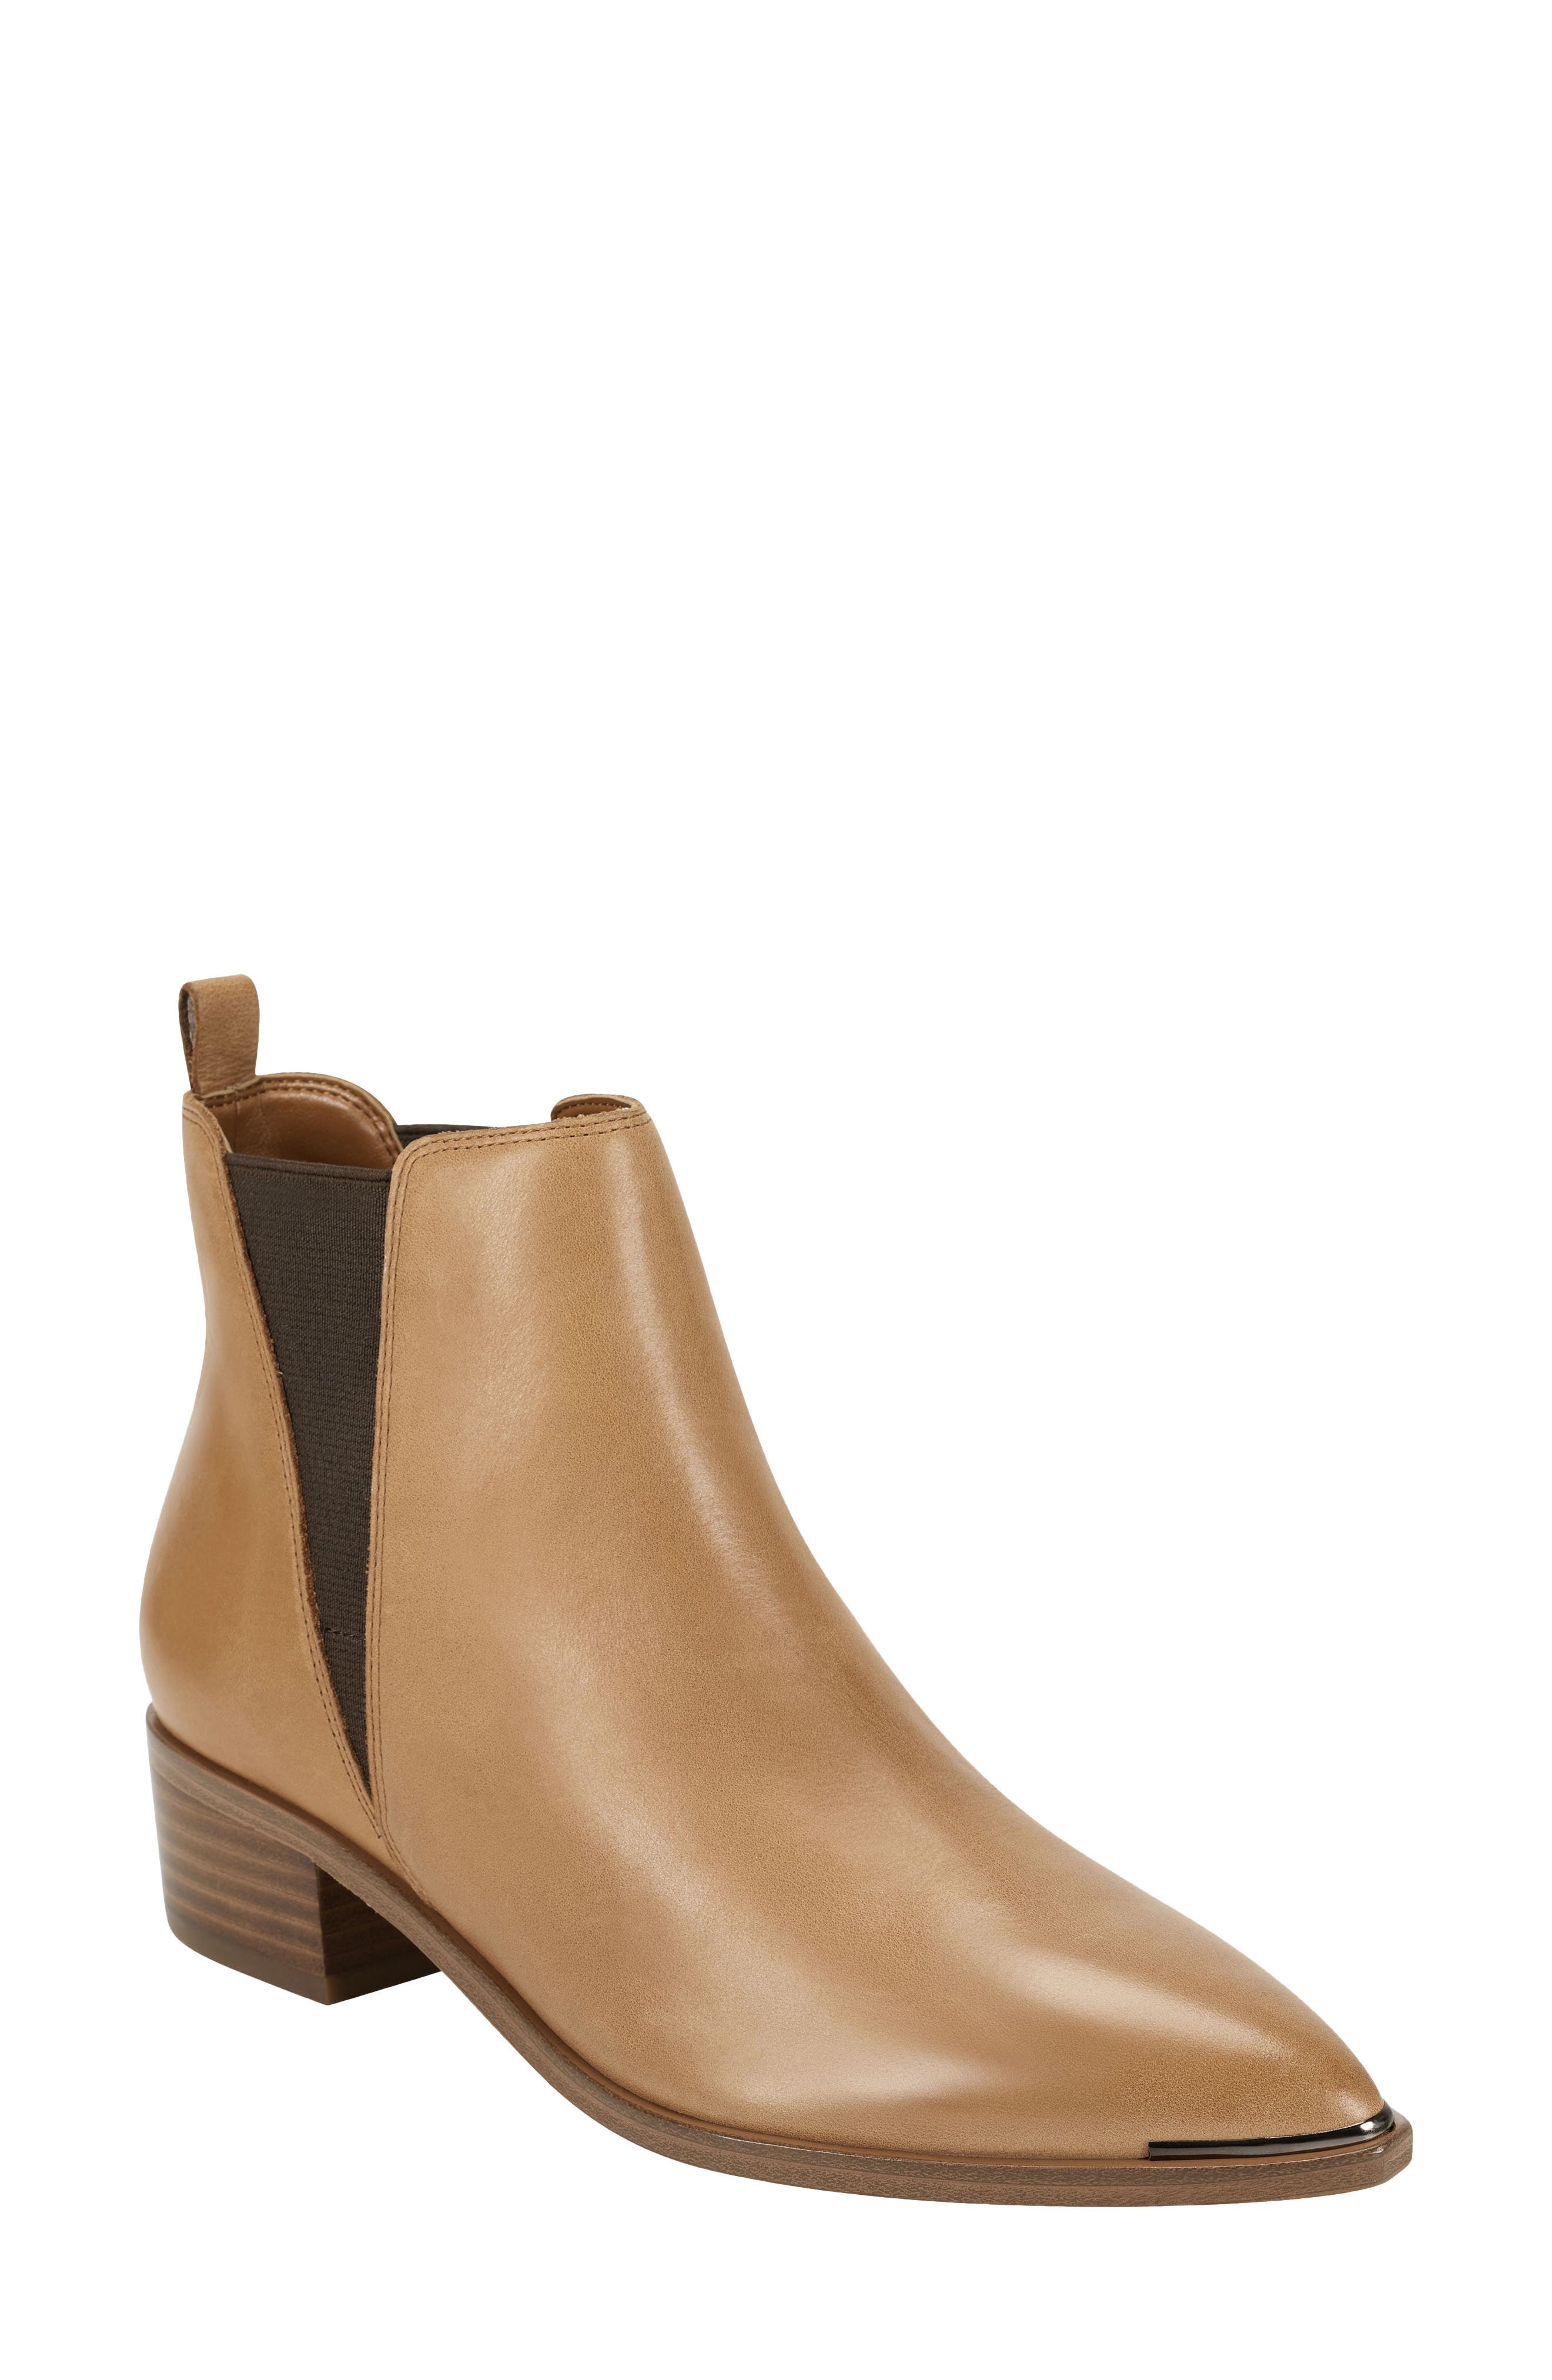 nordstrom marc fisher boots